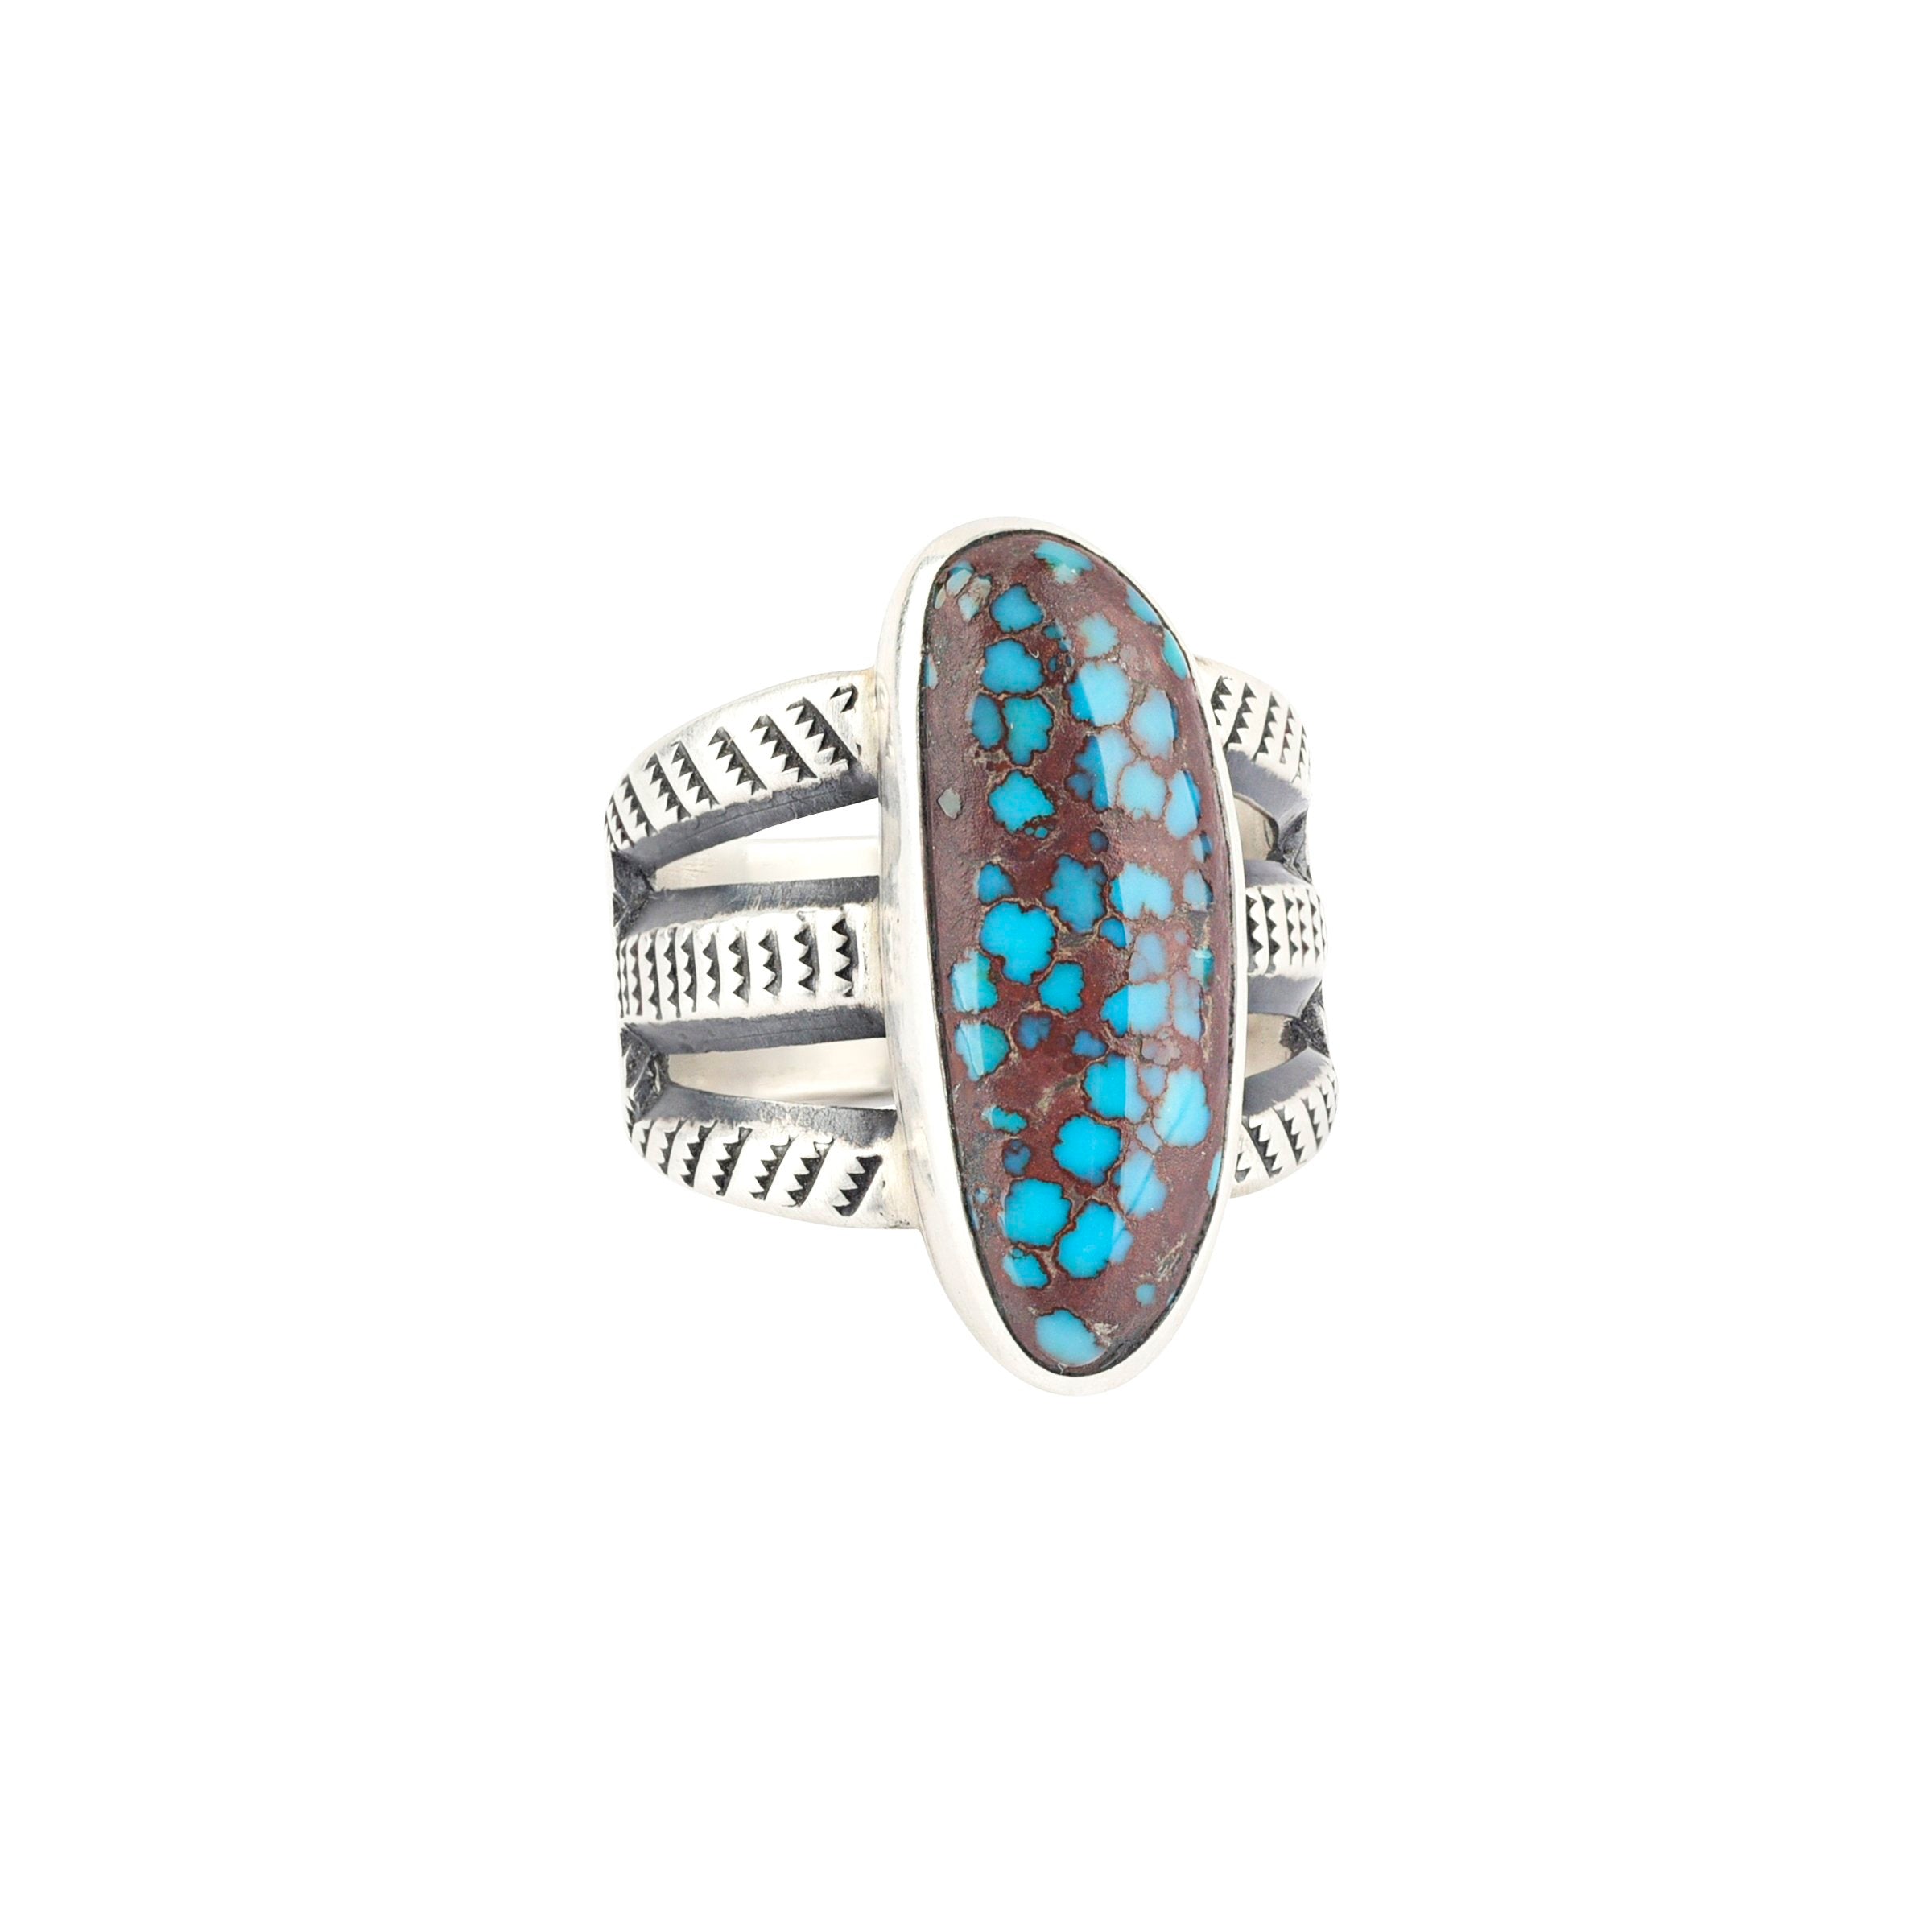 Alex Horst Turquoise Stamp Ring - Size 7 1/2